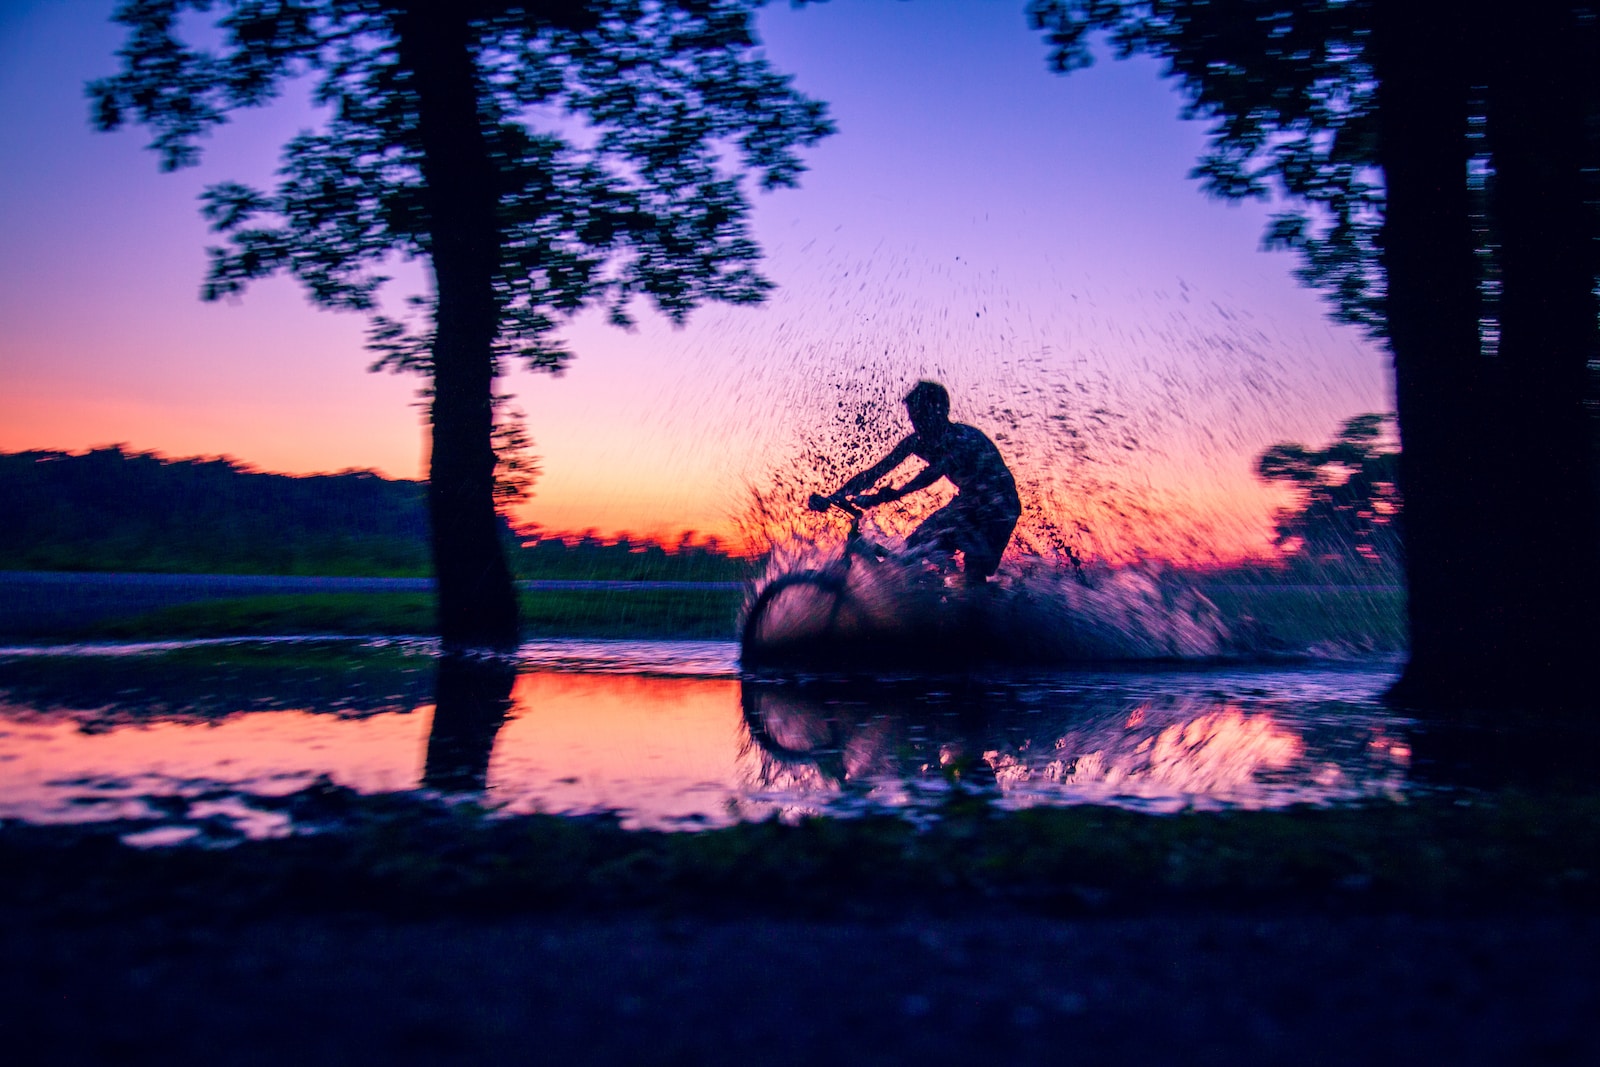 Action Photo silhouette photo of man riding bicycle